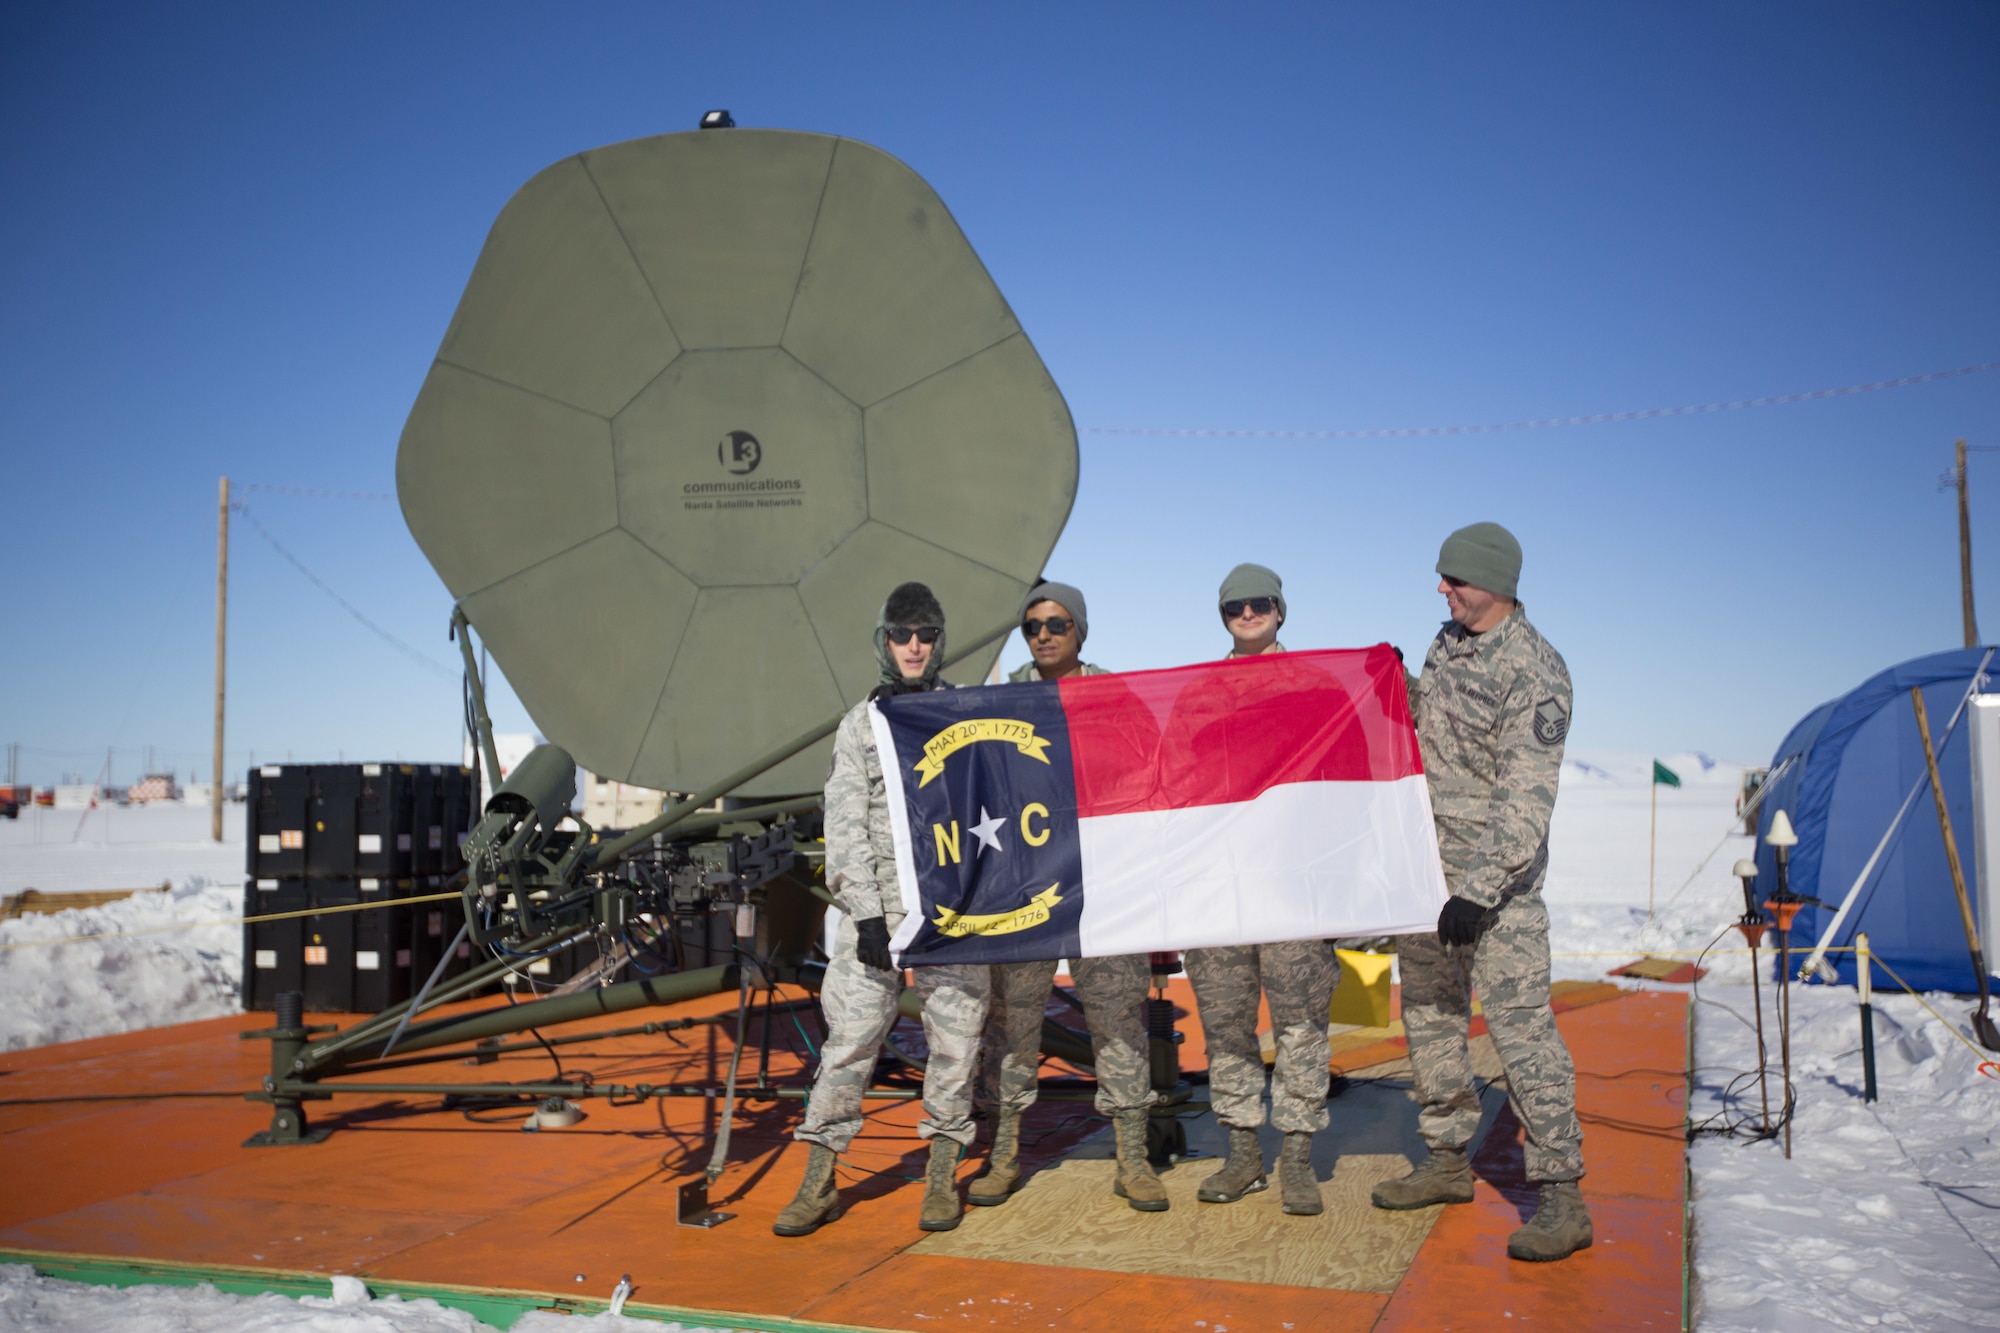 U.S. Air Force Staff Sgt. Kristofer Vandermark (far left), Staff Sgt. Titus Poulose (left), Staff Sgt. Michael Jennings (right), and Master Sgt. Chris Farnsworth (far right) of the 263rd Combat Communications Squadron, a detachment of the 145th Airlift Wing, pose for a photo while deployed to Antarctica in support of Operation Deep Freeze (ODF), at McMurdo Station, Antarctica, Dec. 1, 2018. ODF is a military mission in support of the National Science Foundation throughout the continent of Antarctica, to provide air, land, and sea support to McMurdo Station. (Courtesy photo submitted by Civ. Johnny Chiang)